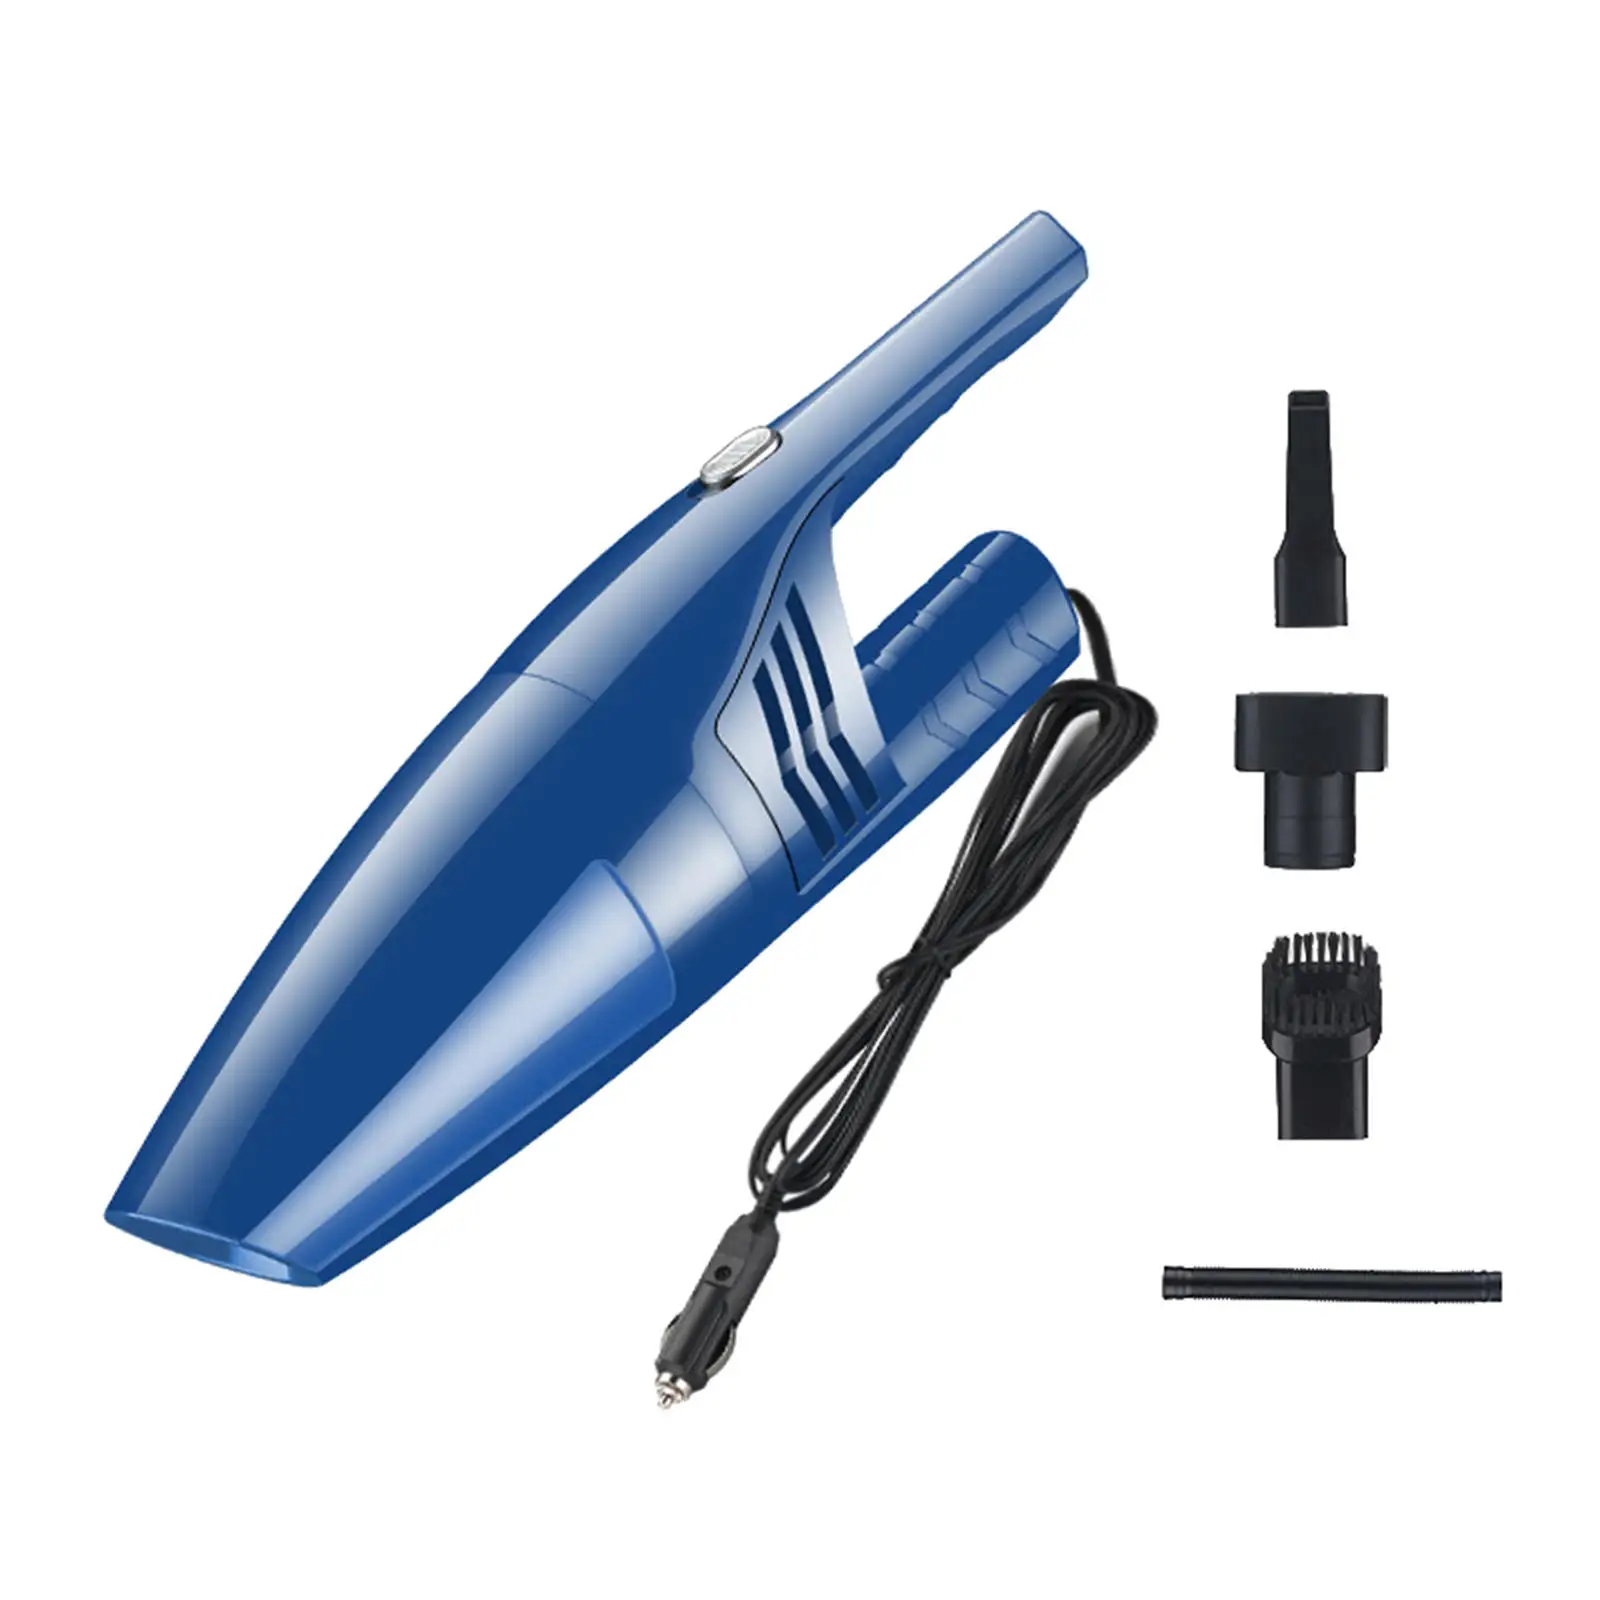 Portable Car Home Vacuum Cleaner 4500PA Office Washable Home 120W Lightweight Small Quick Charge Dust Crevices Strong Suction